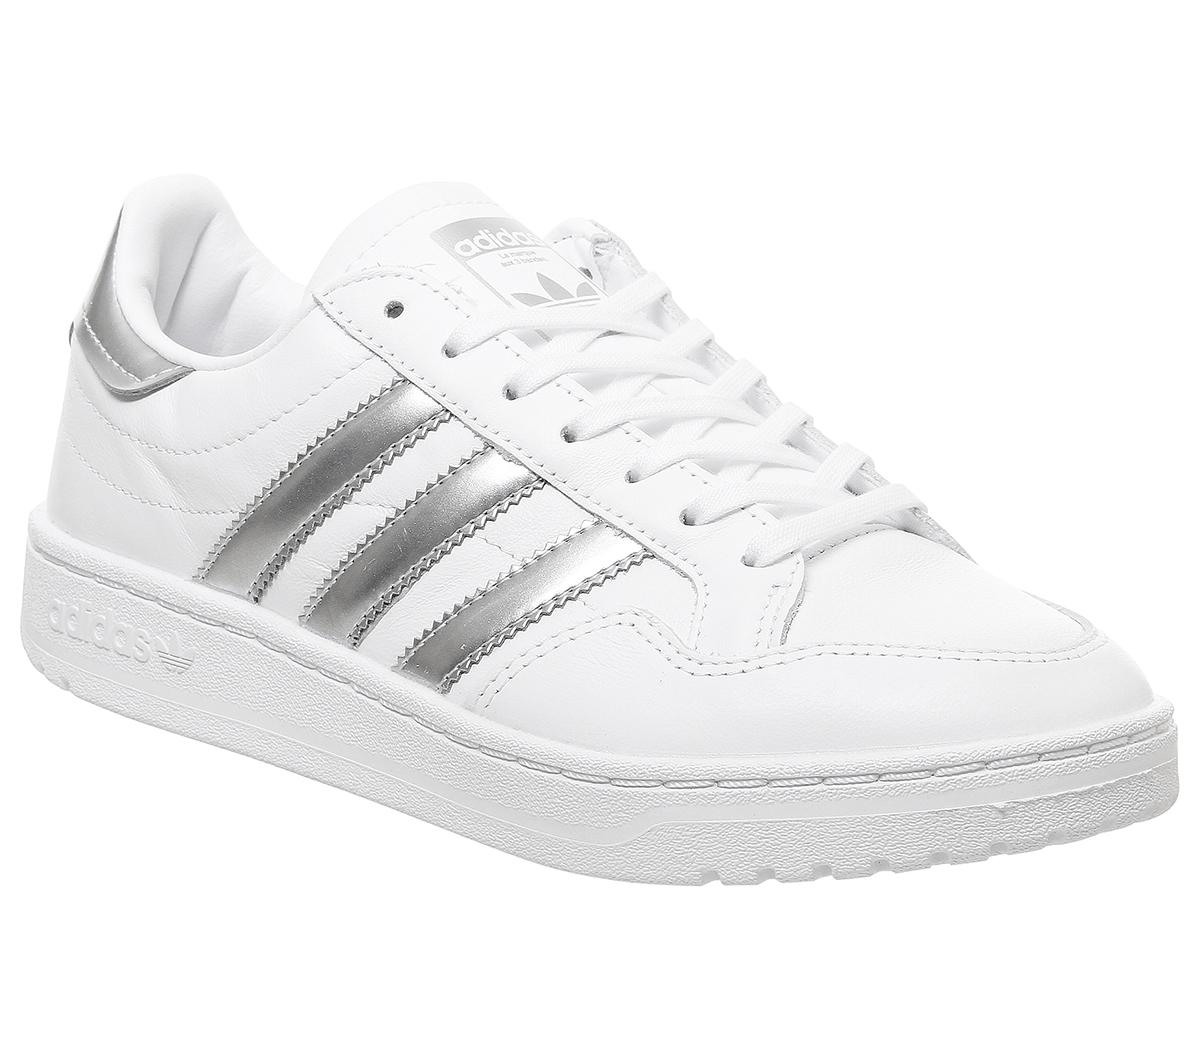 white and silver adidas